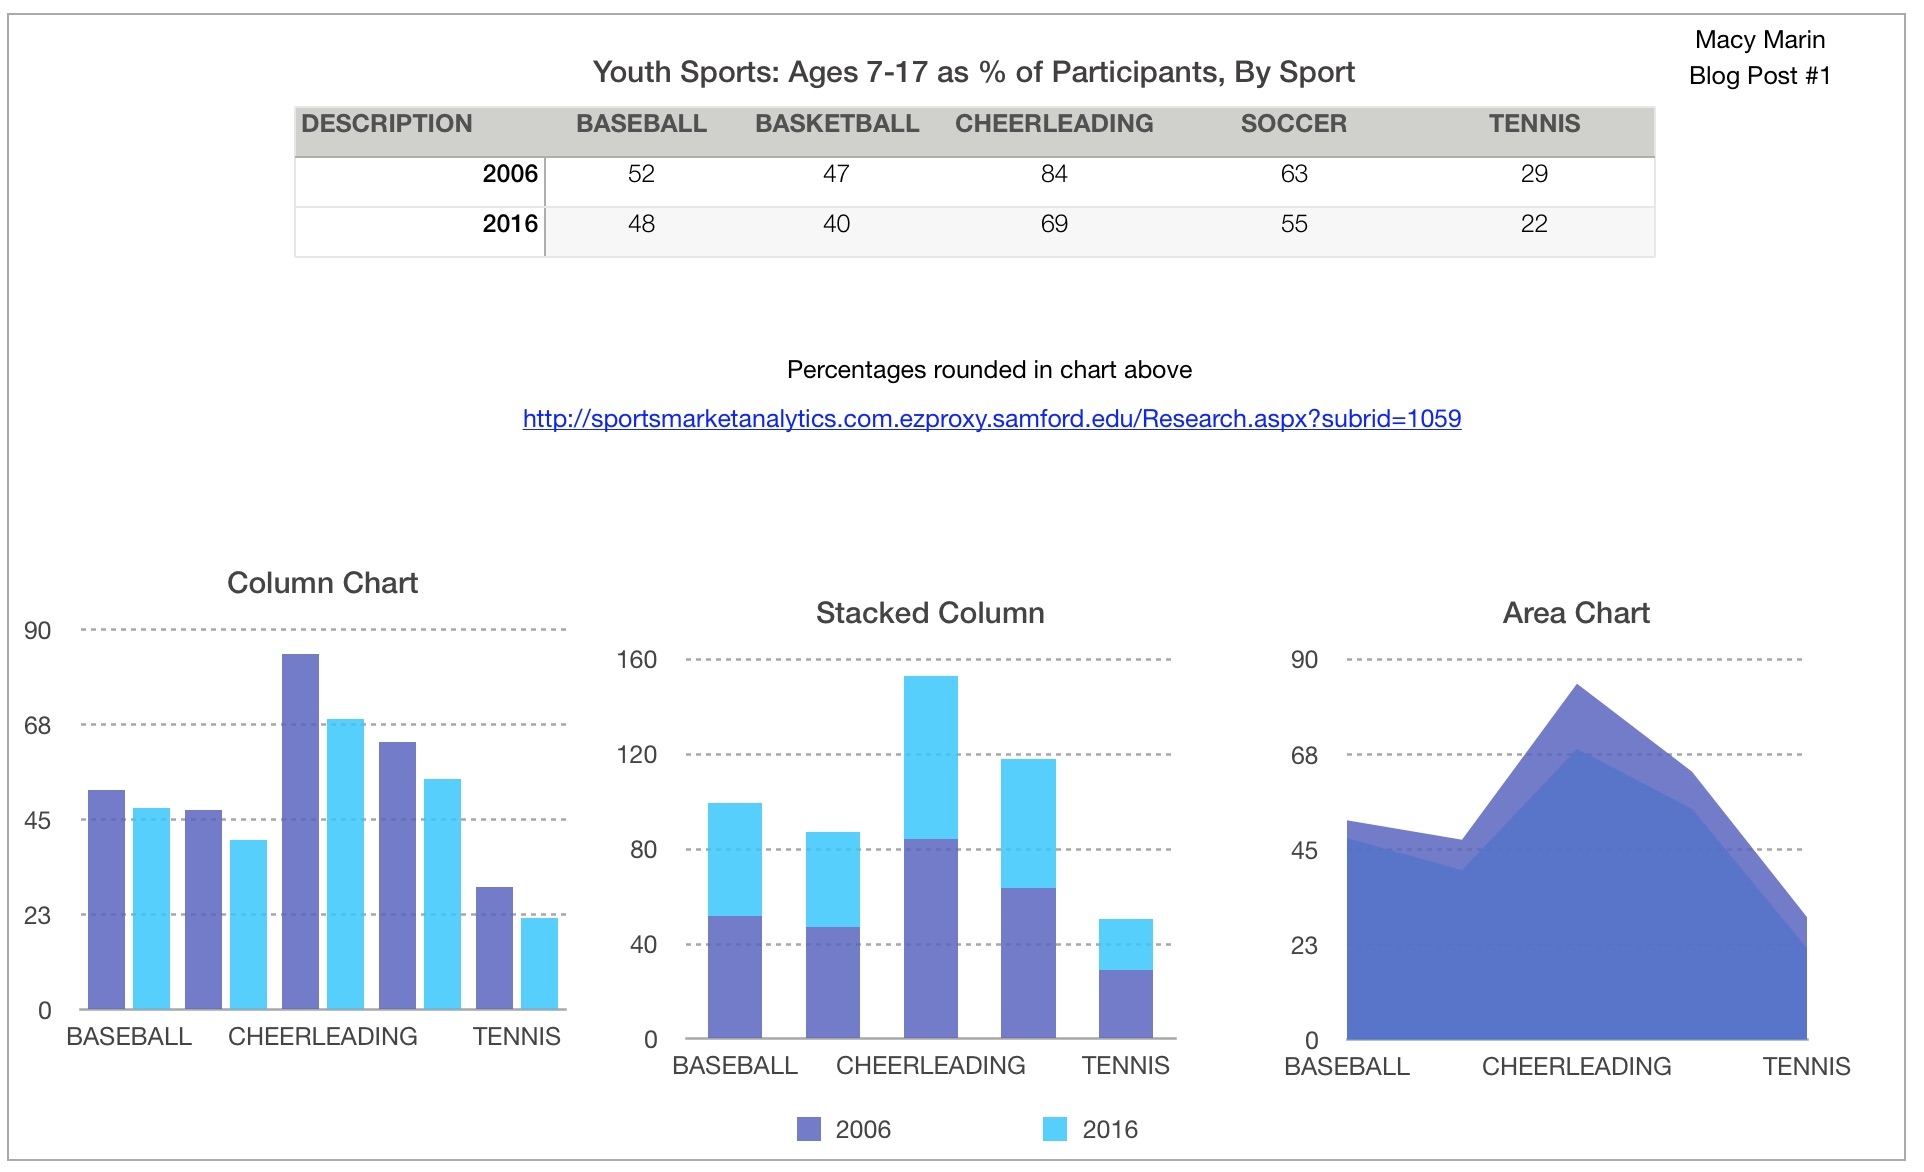 Youth sports ages 7-17